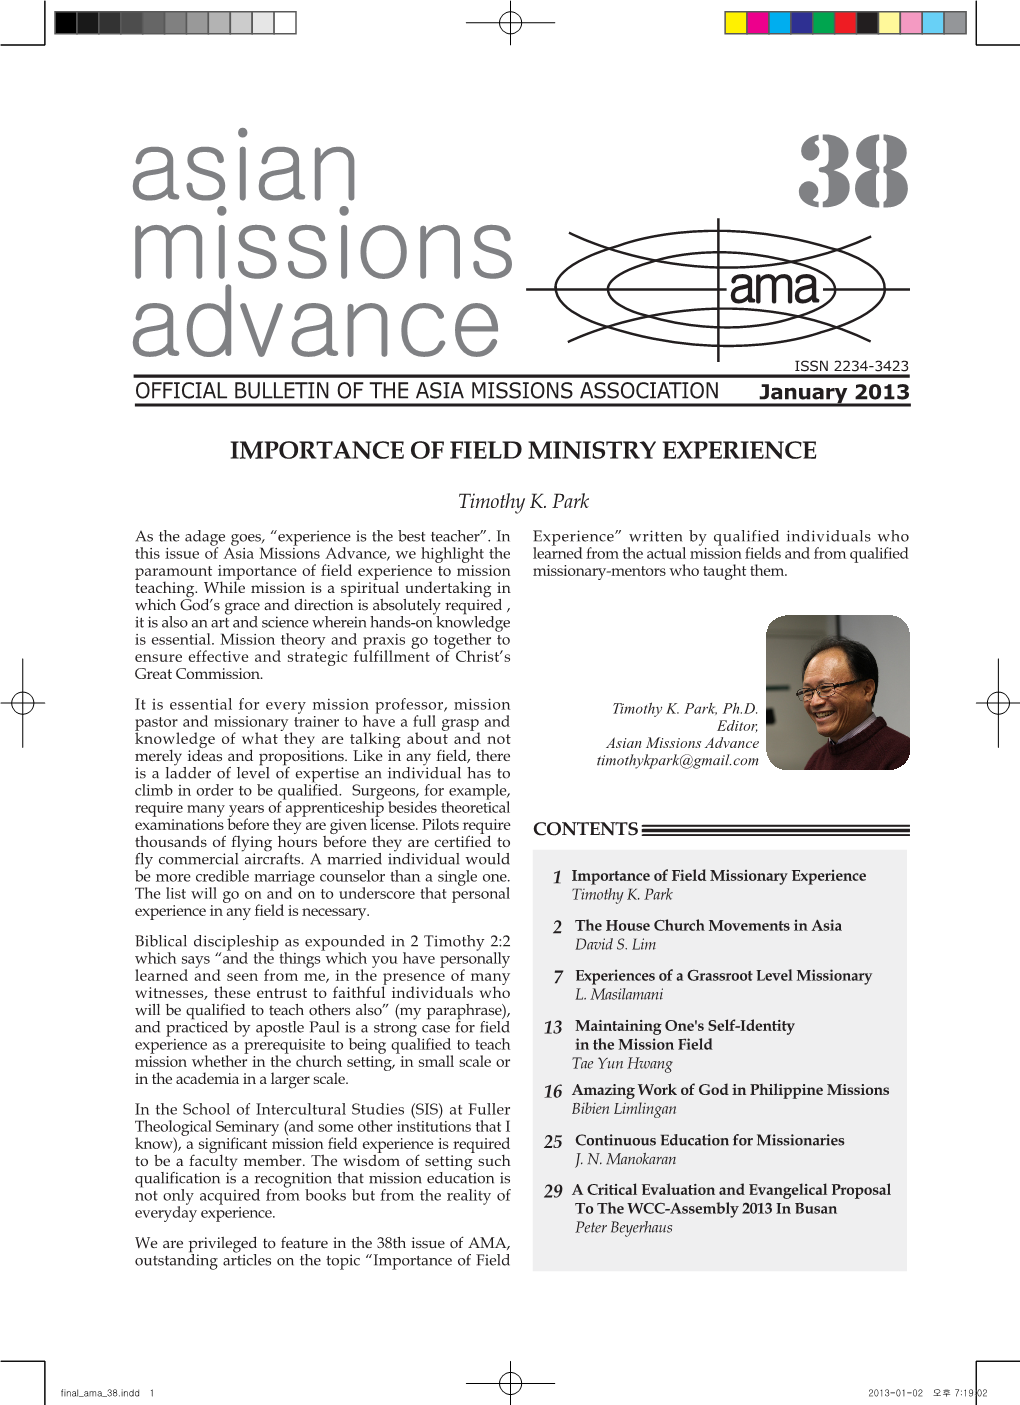 Asian Missions Advance Merely Ideas and Propositions